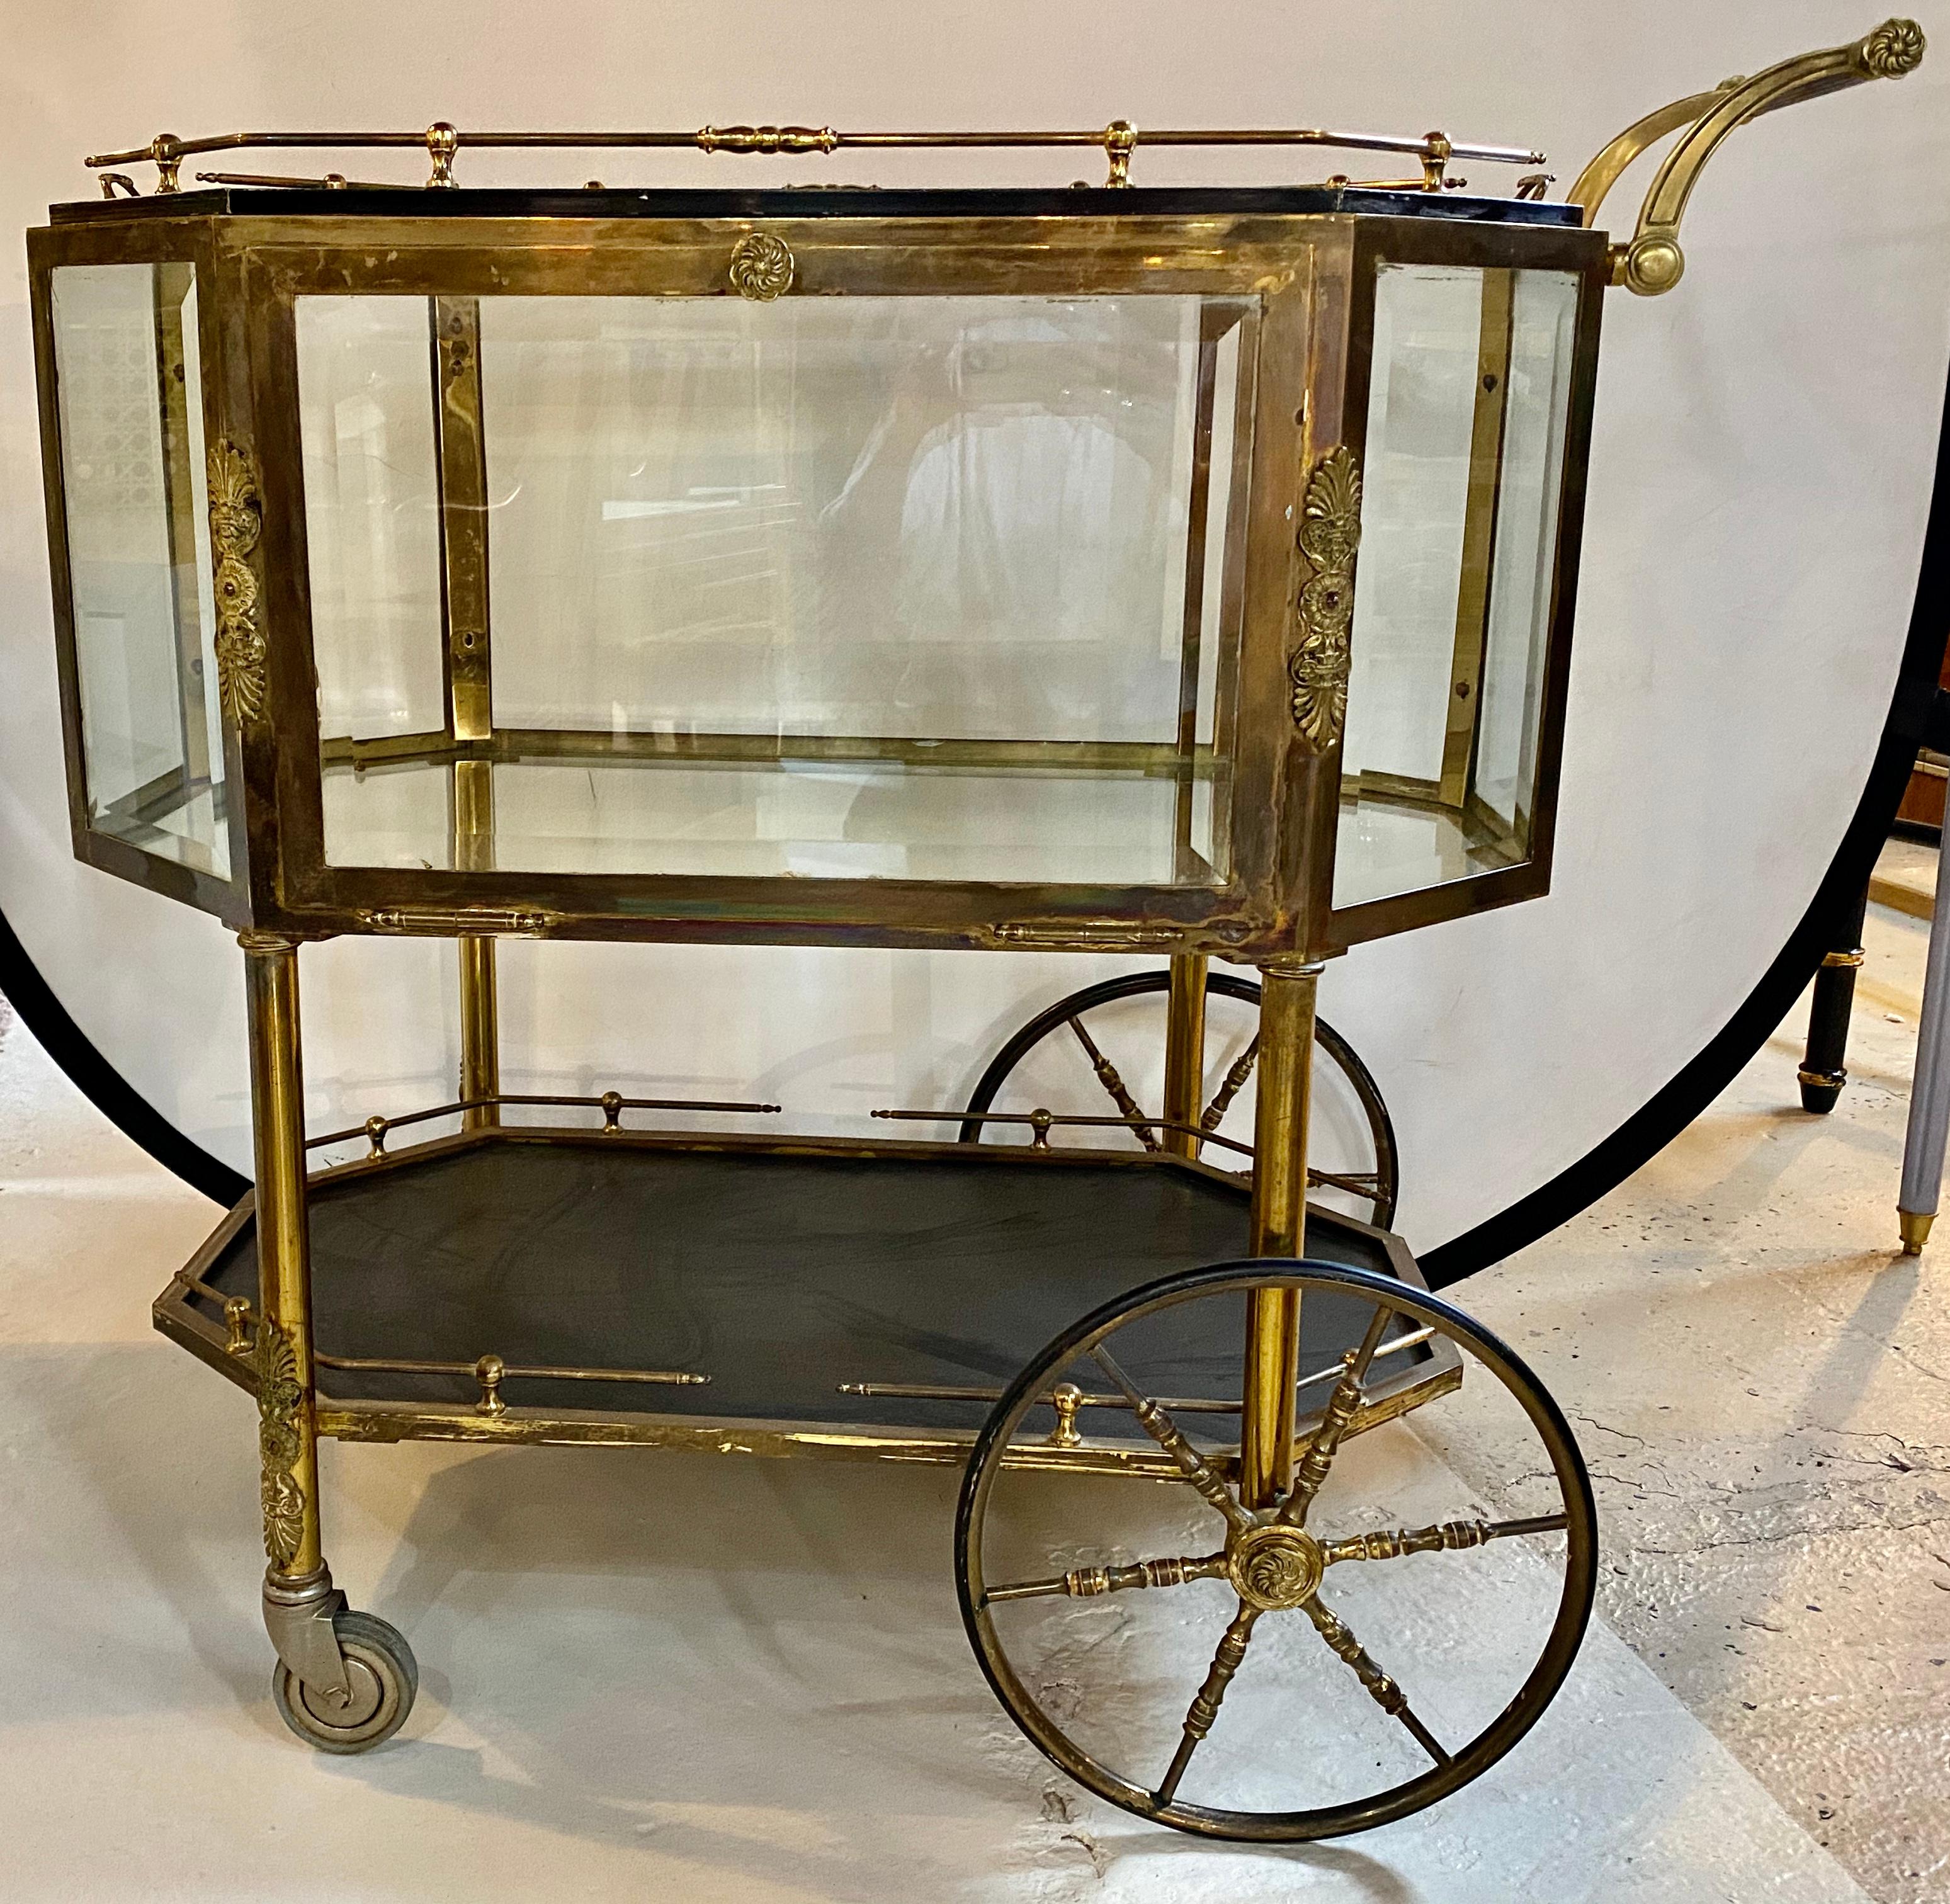 Hollywood Regency bronze tray top beveled glass showcase serving cart or wagon
The large brass wheels make this rolling cart easy to maneuver and give the whole a palatial look. The all beveled glass case having pull down sides to allow for easy